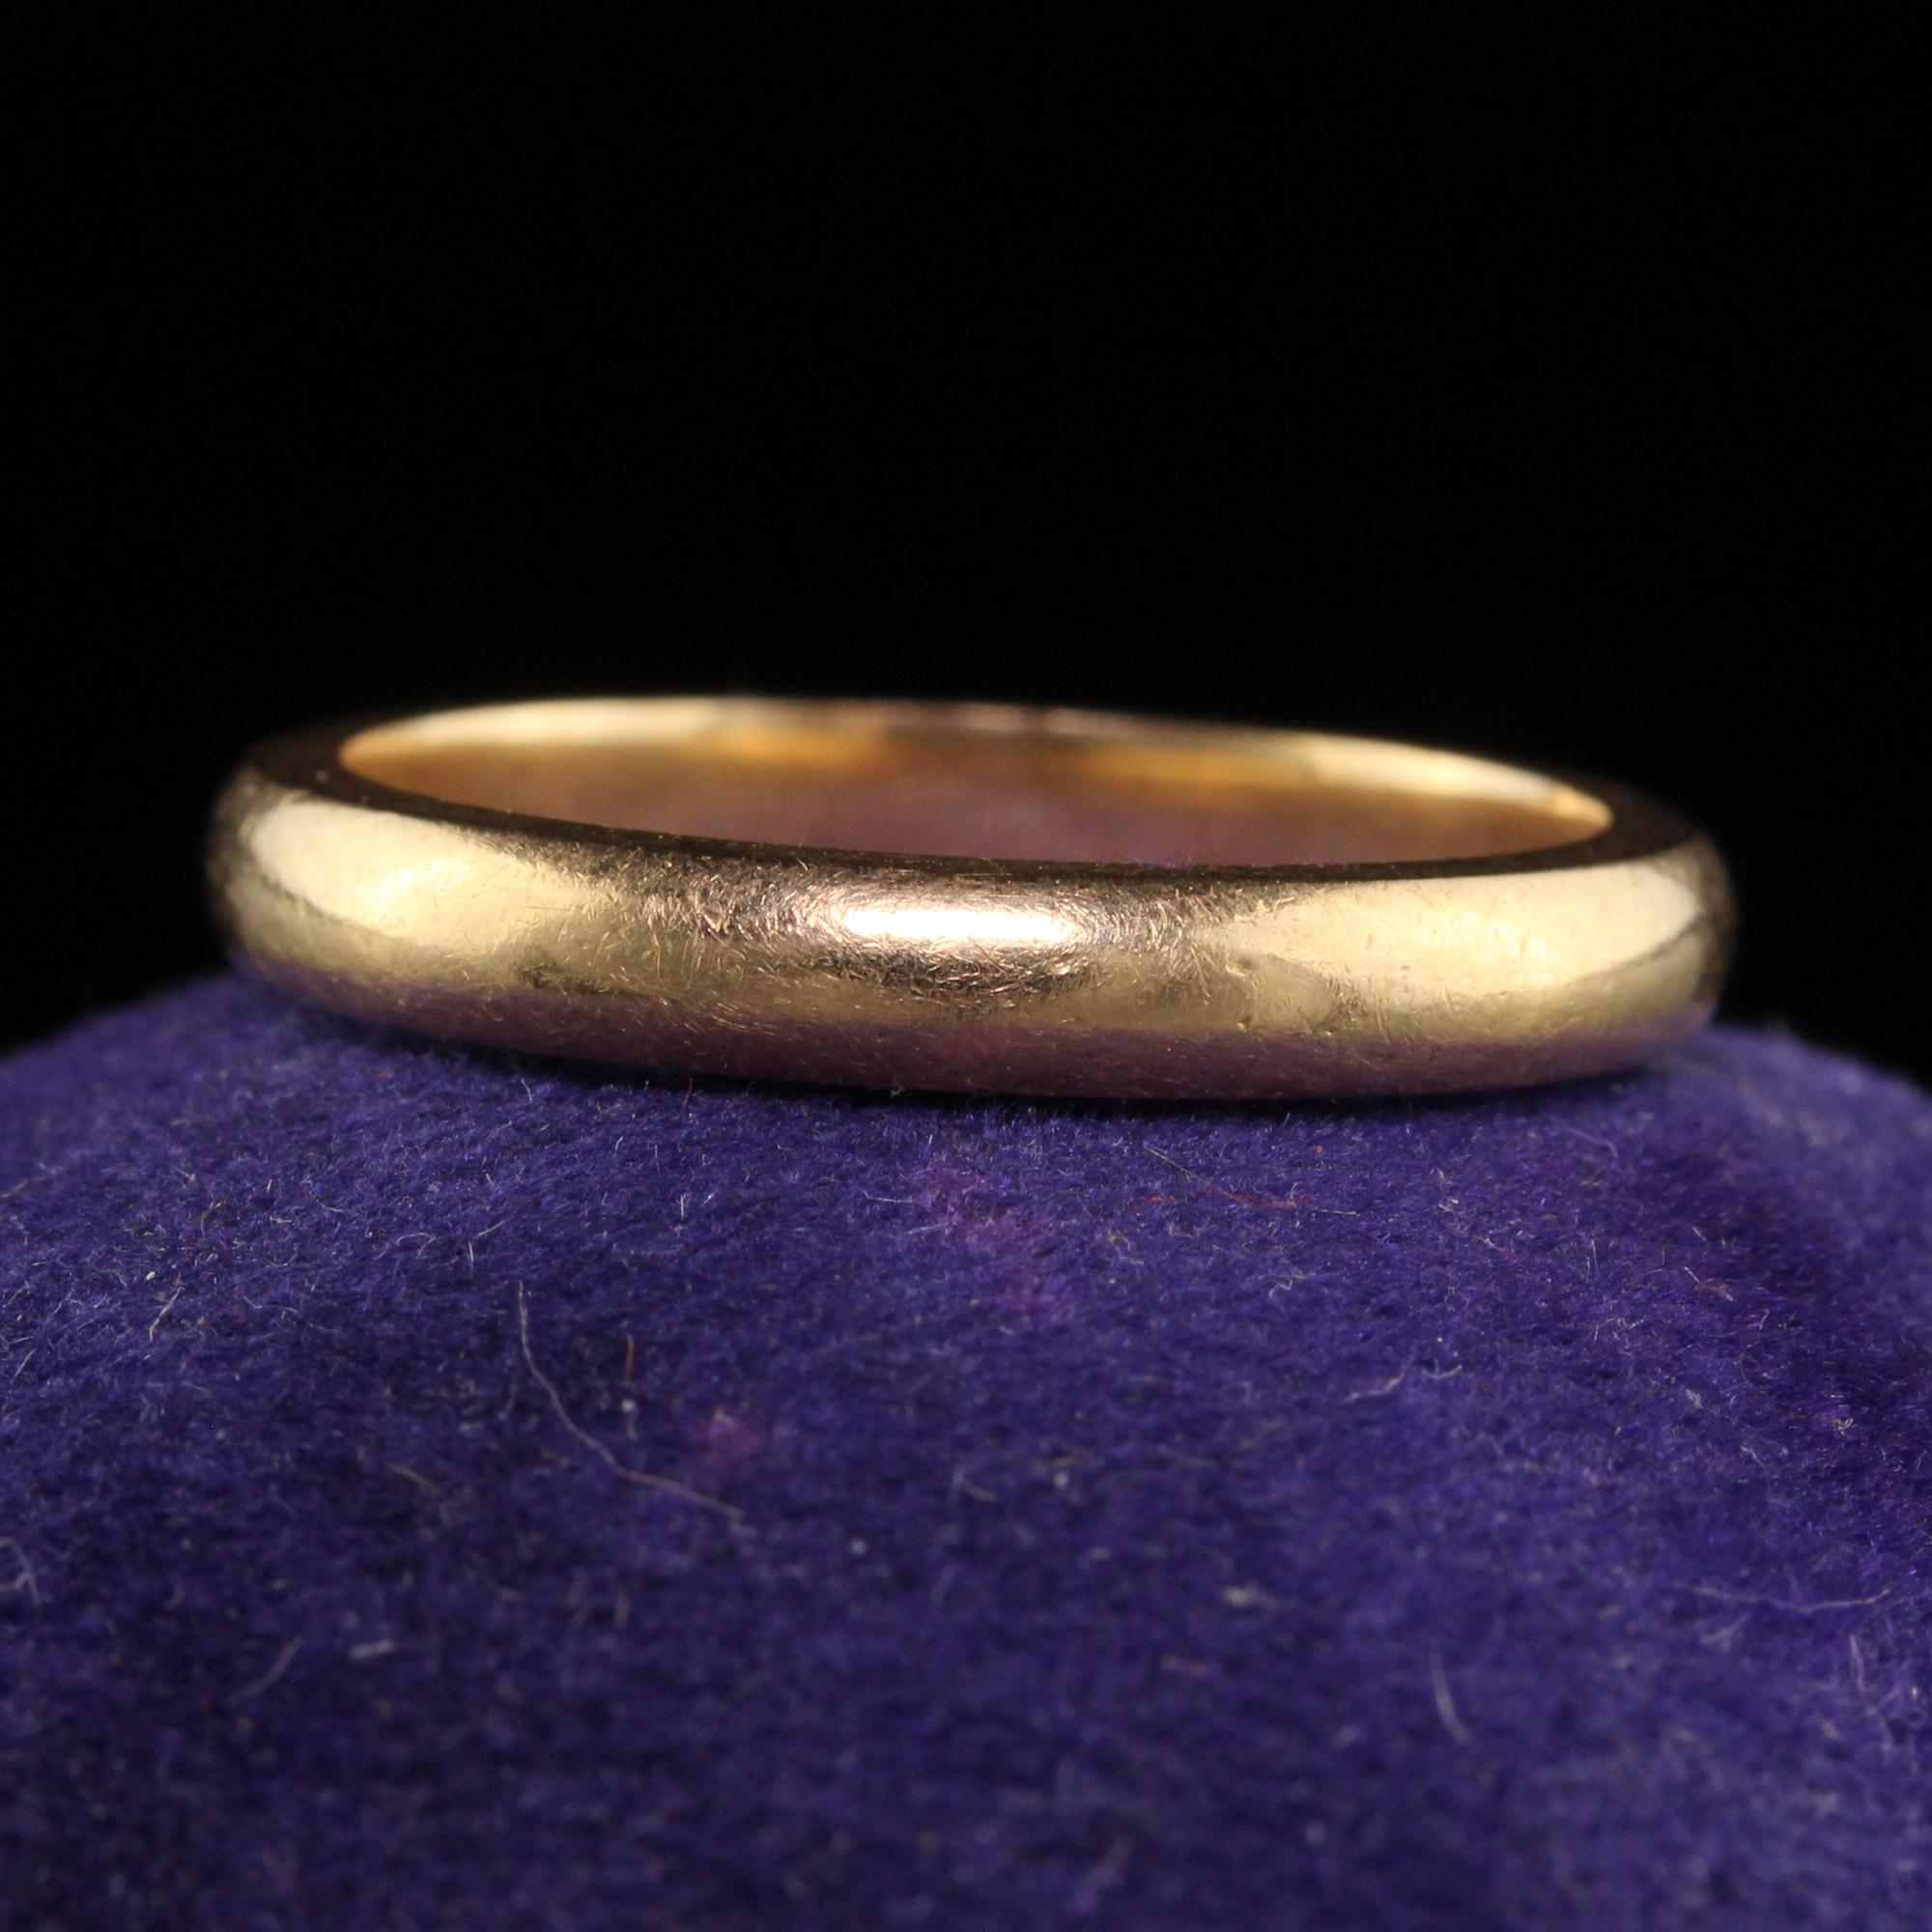 Beautiful Antique Art Deco Tiffany and Co 18K Yellow Gold Classic Wedding Band. This classic wedding band is crafted in 18k yellow gold. The band is in great condition and has a nice rich gold oxidation with all the hallmarks inside the ring intact